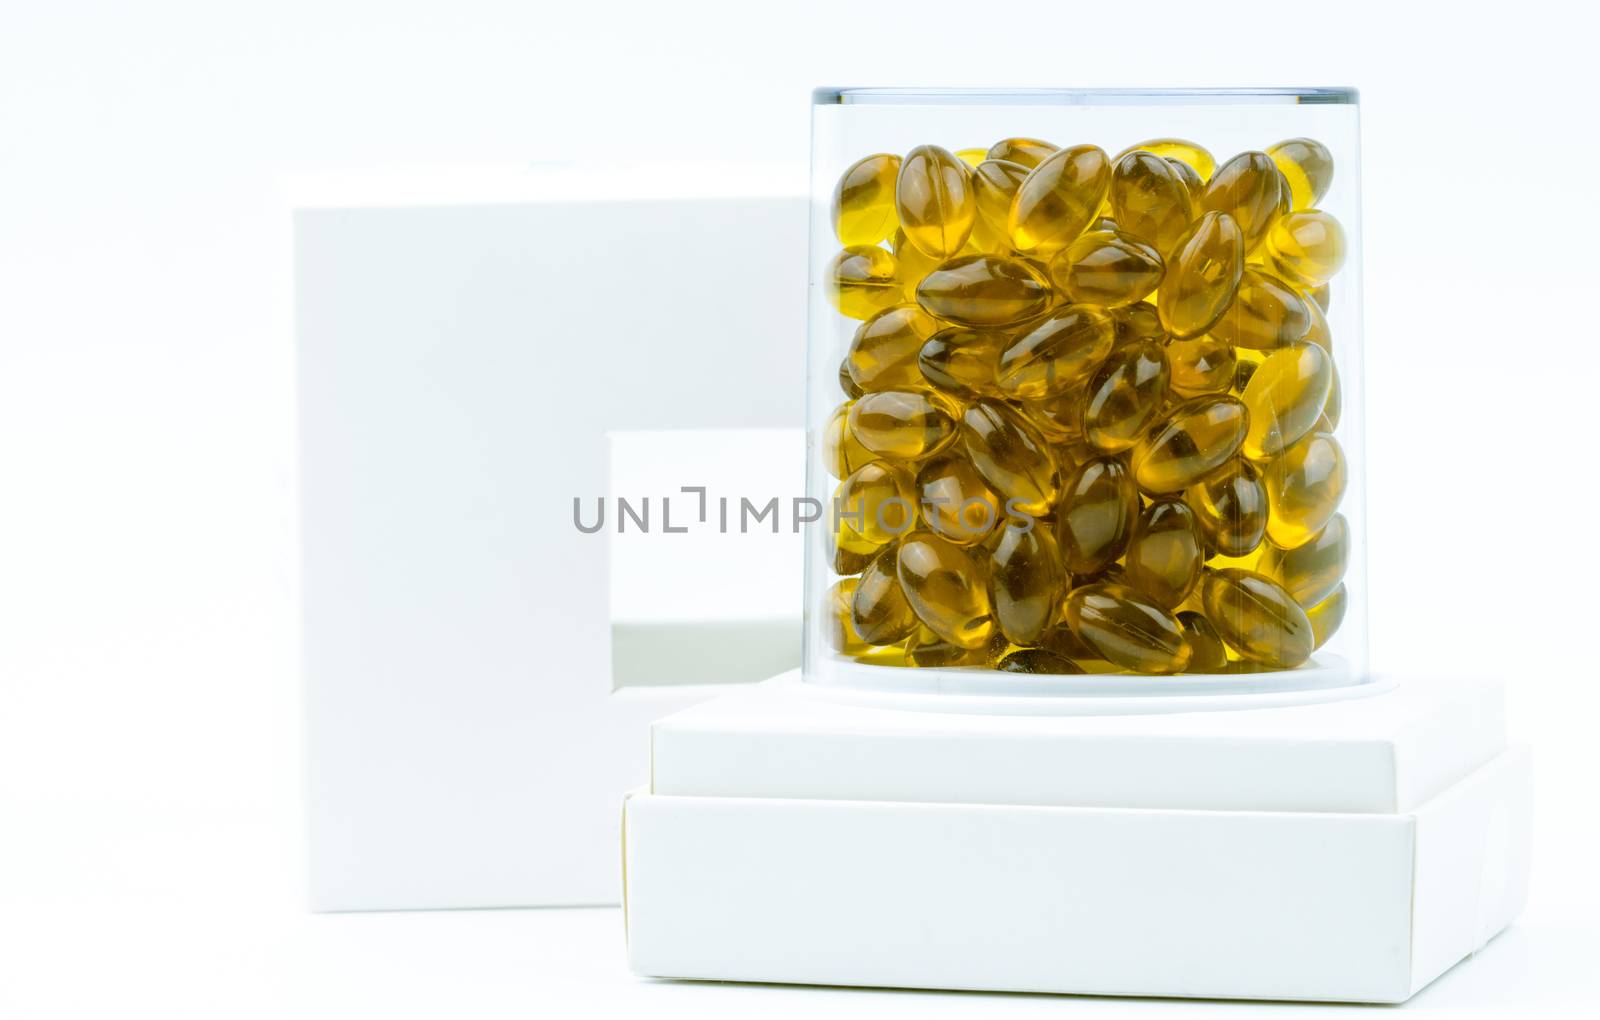 Rice bran oil extract capsule in luxury plastic box packaging isolated on white background